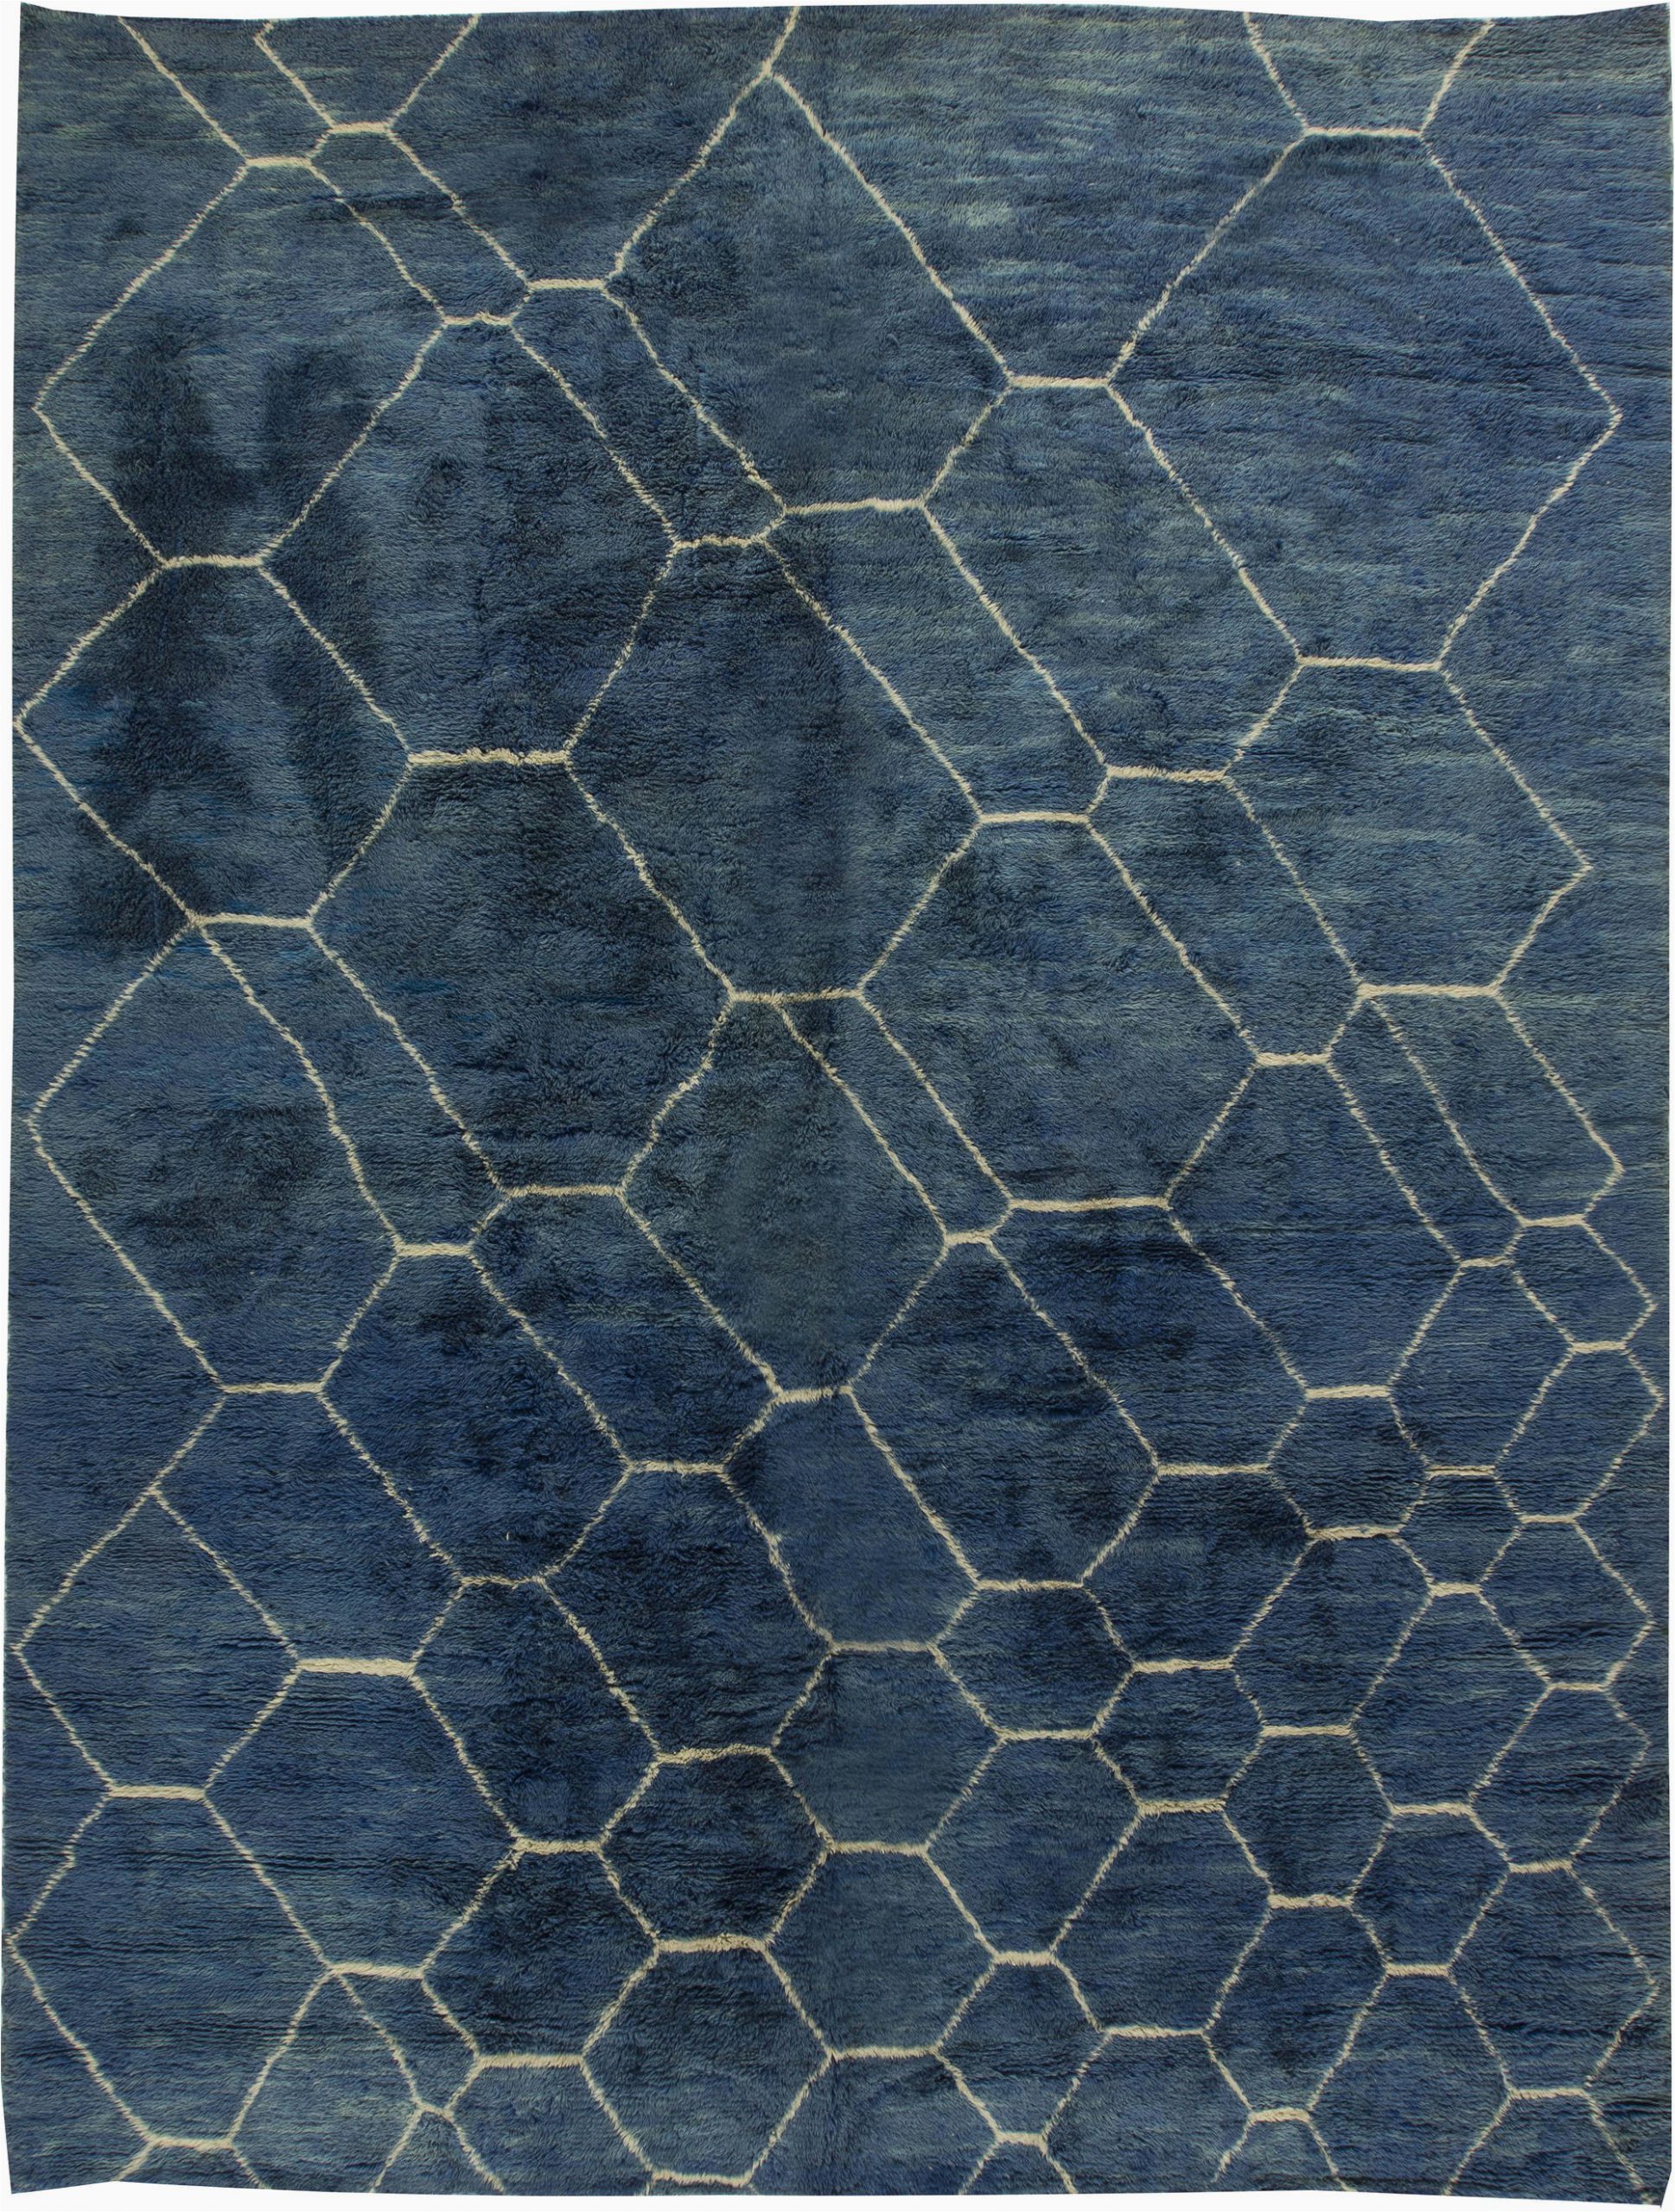 Blue and White Moroccan Rug Moroccan Rug N by Dlb